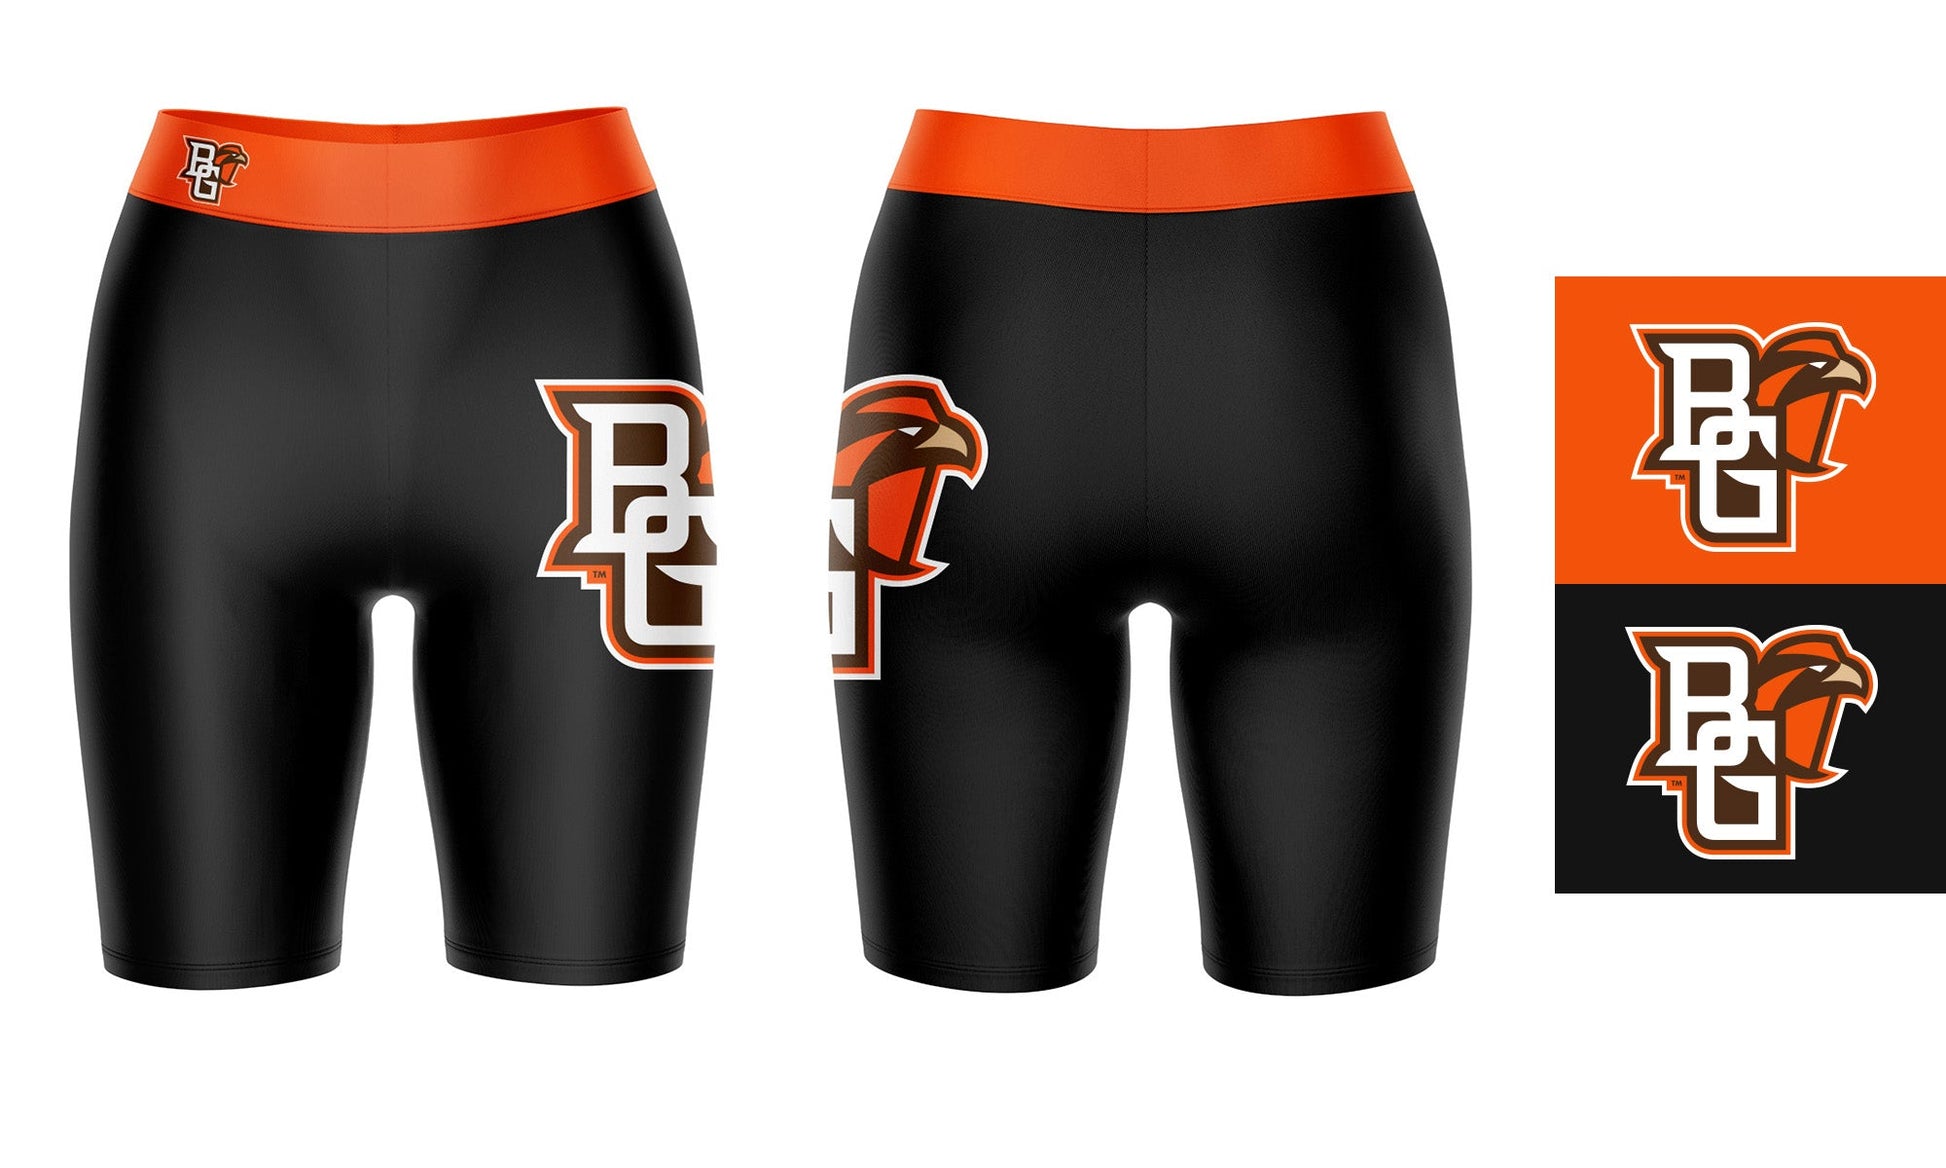 Bowling Green Falcons Vive La Fete Game Day Logo on Thigh and Waistband Black and Orange Women Bike Short 9 Inseam"